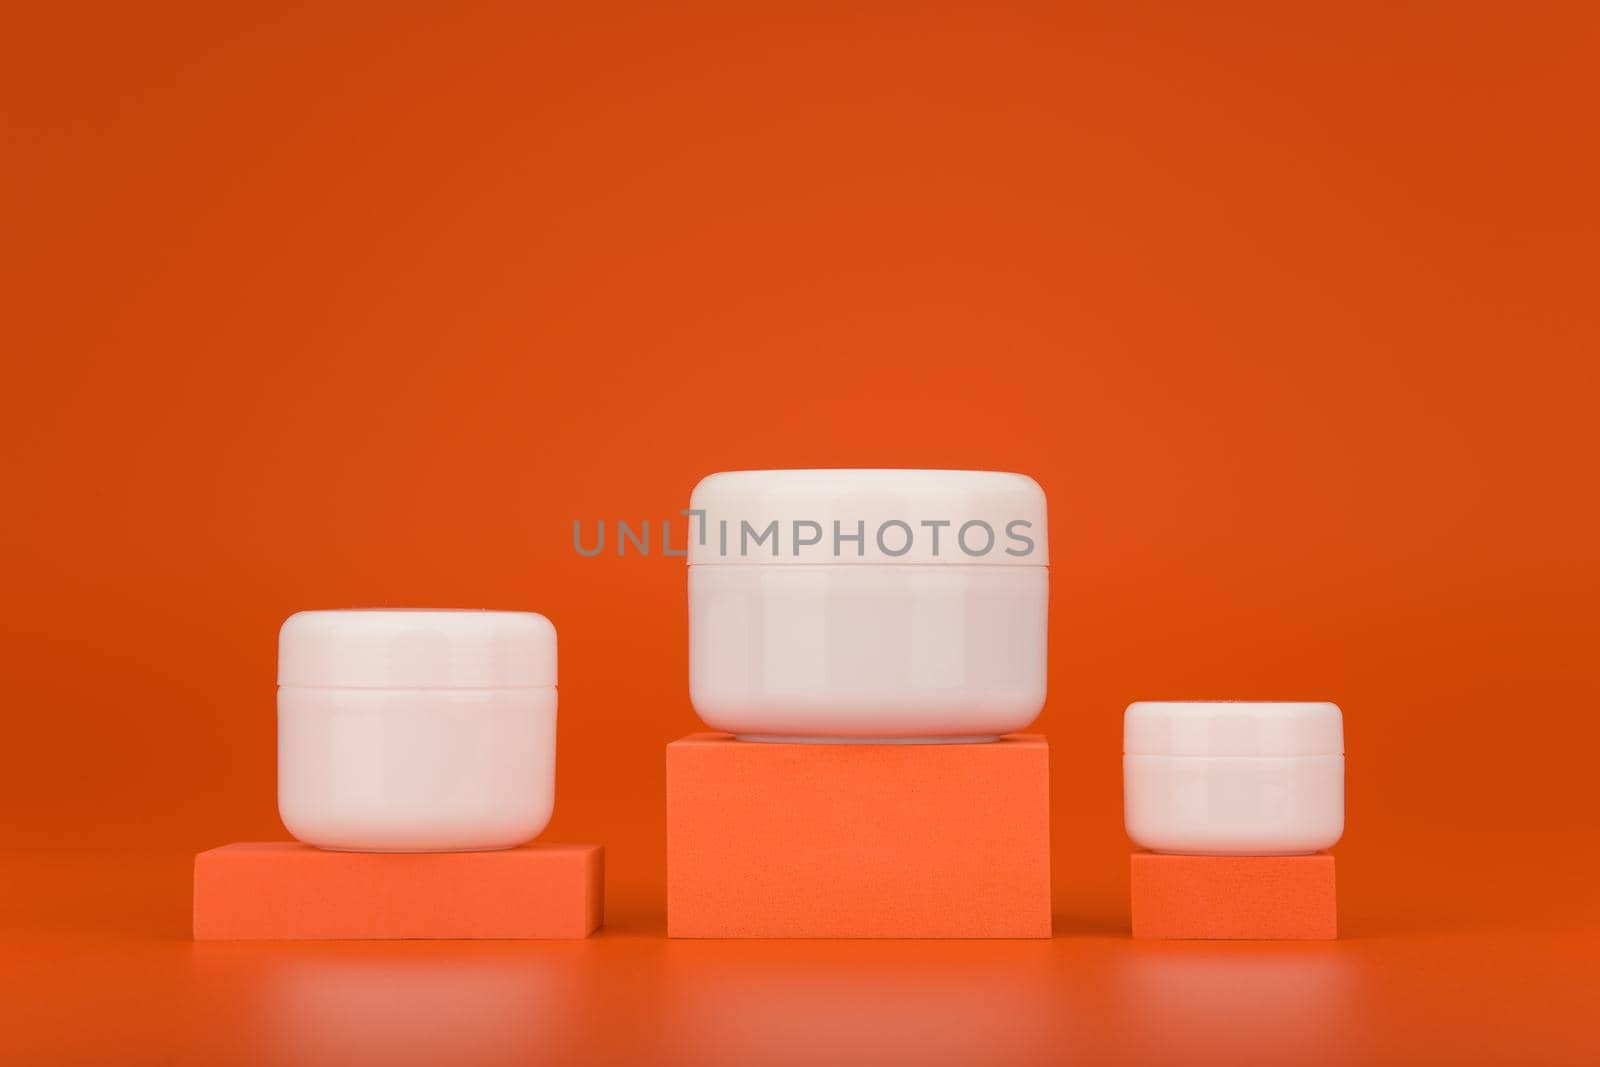 Set of three cosmetic jars of different sizes on podiums against orange background with copy space. Concept of cream, lotion, mask or scrub with vitamin C for anti aging or regular skin care